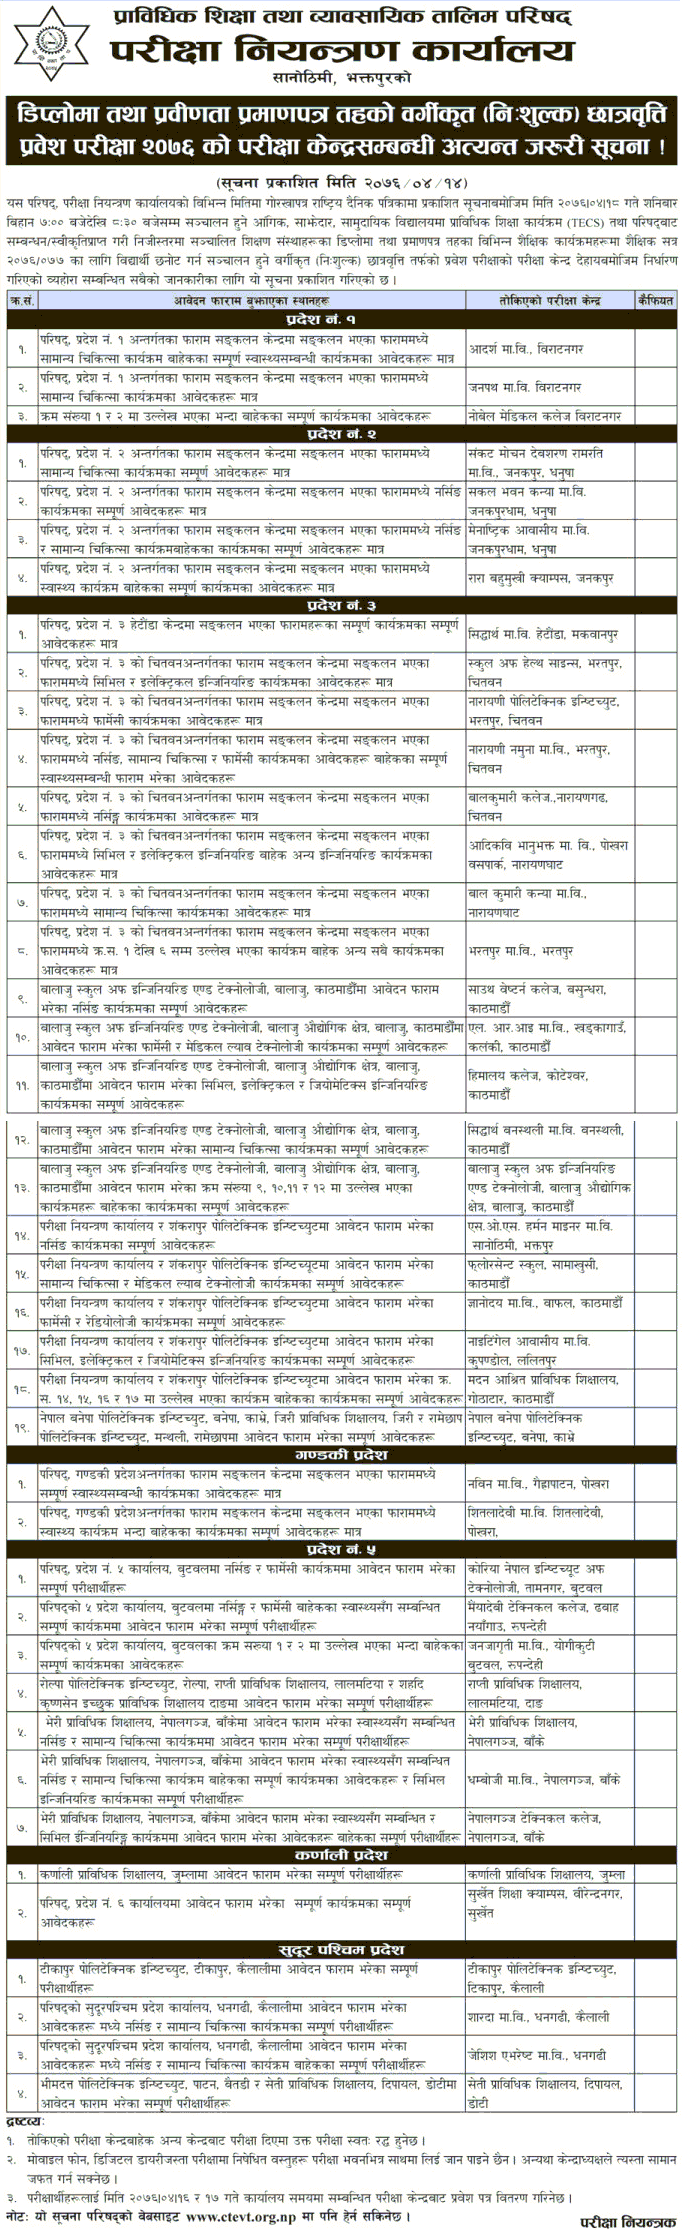 Scholarship Entrance Examination Center of Diploma and PCL Level - CTEVT